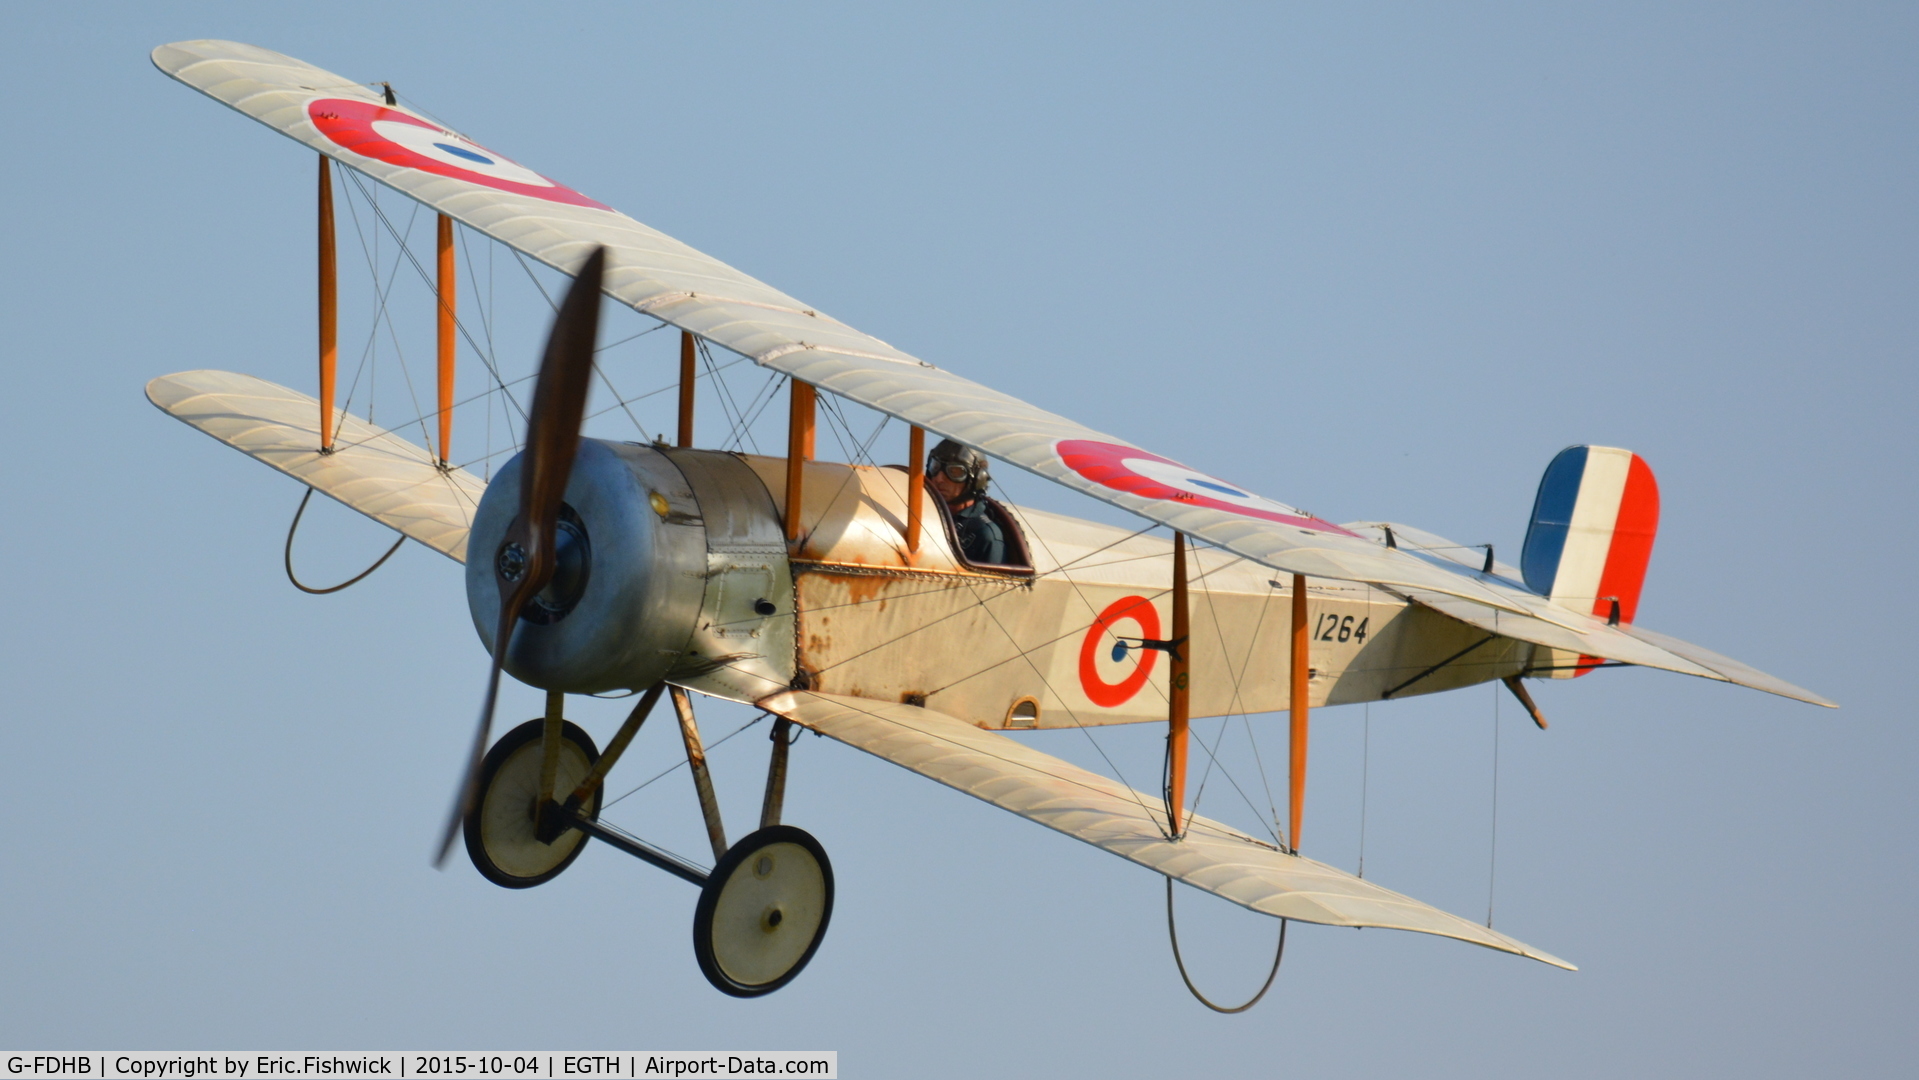 G-FDHB, 2014 Bristol Scout C Replica C/N LAA 353-14755, 43. G-FDHB in display mode at The Shuttleworth 'Uncovered' Airshow (Finale,) Oct. 2015.